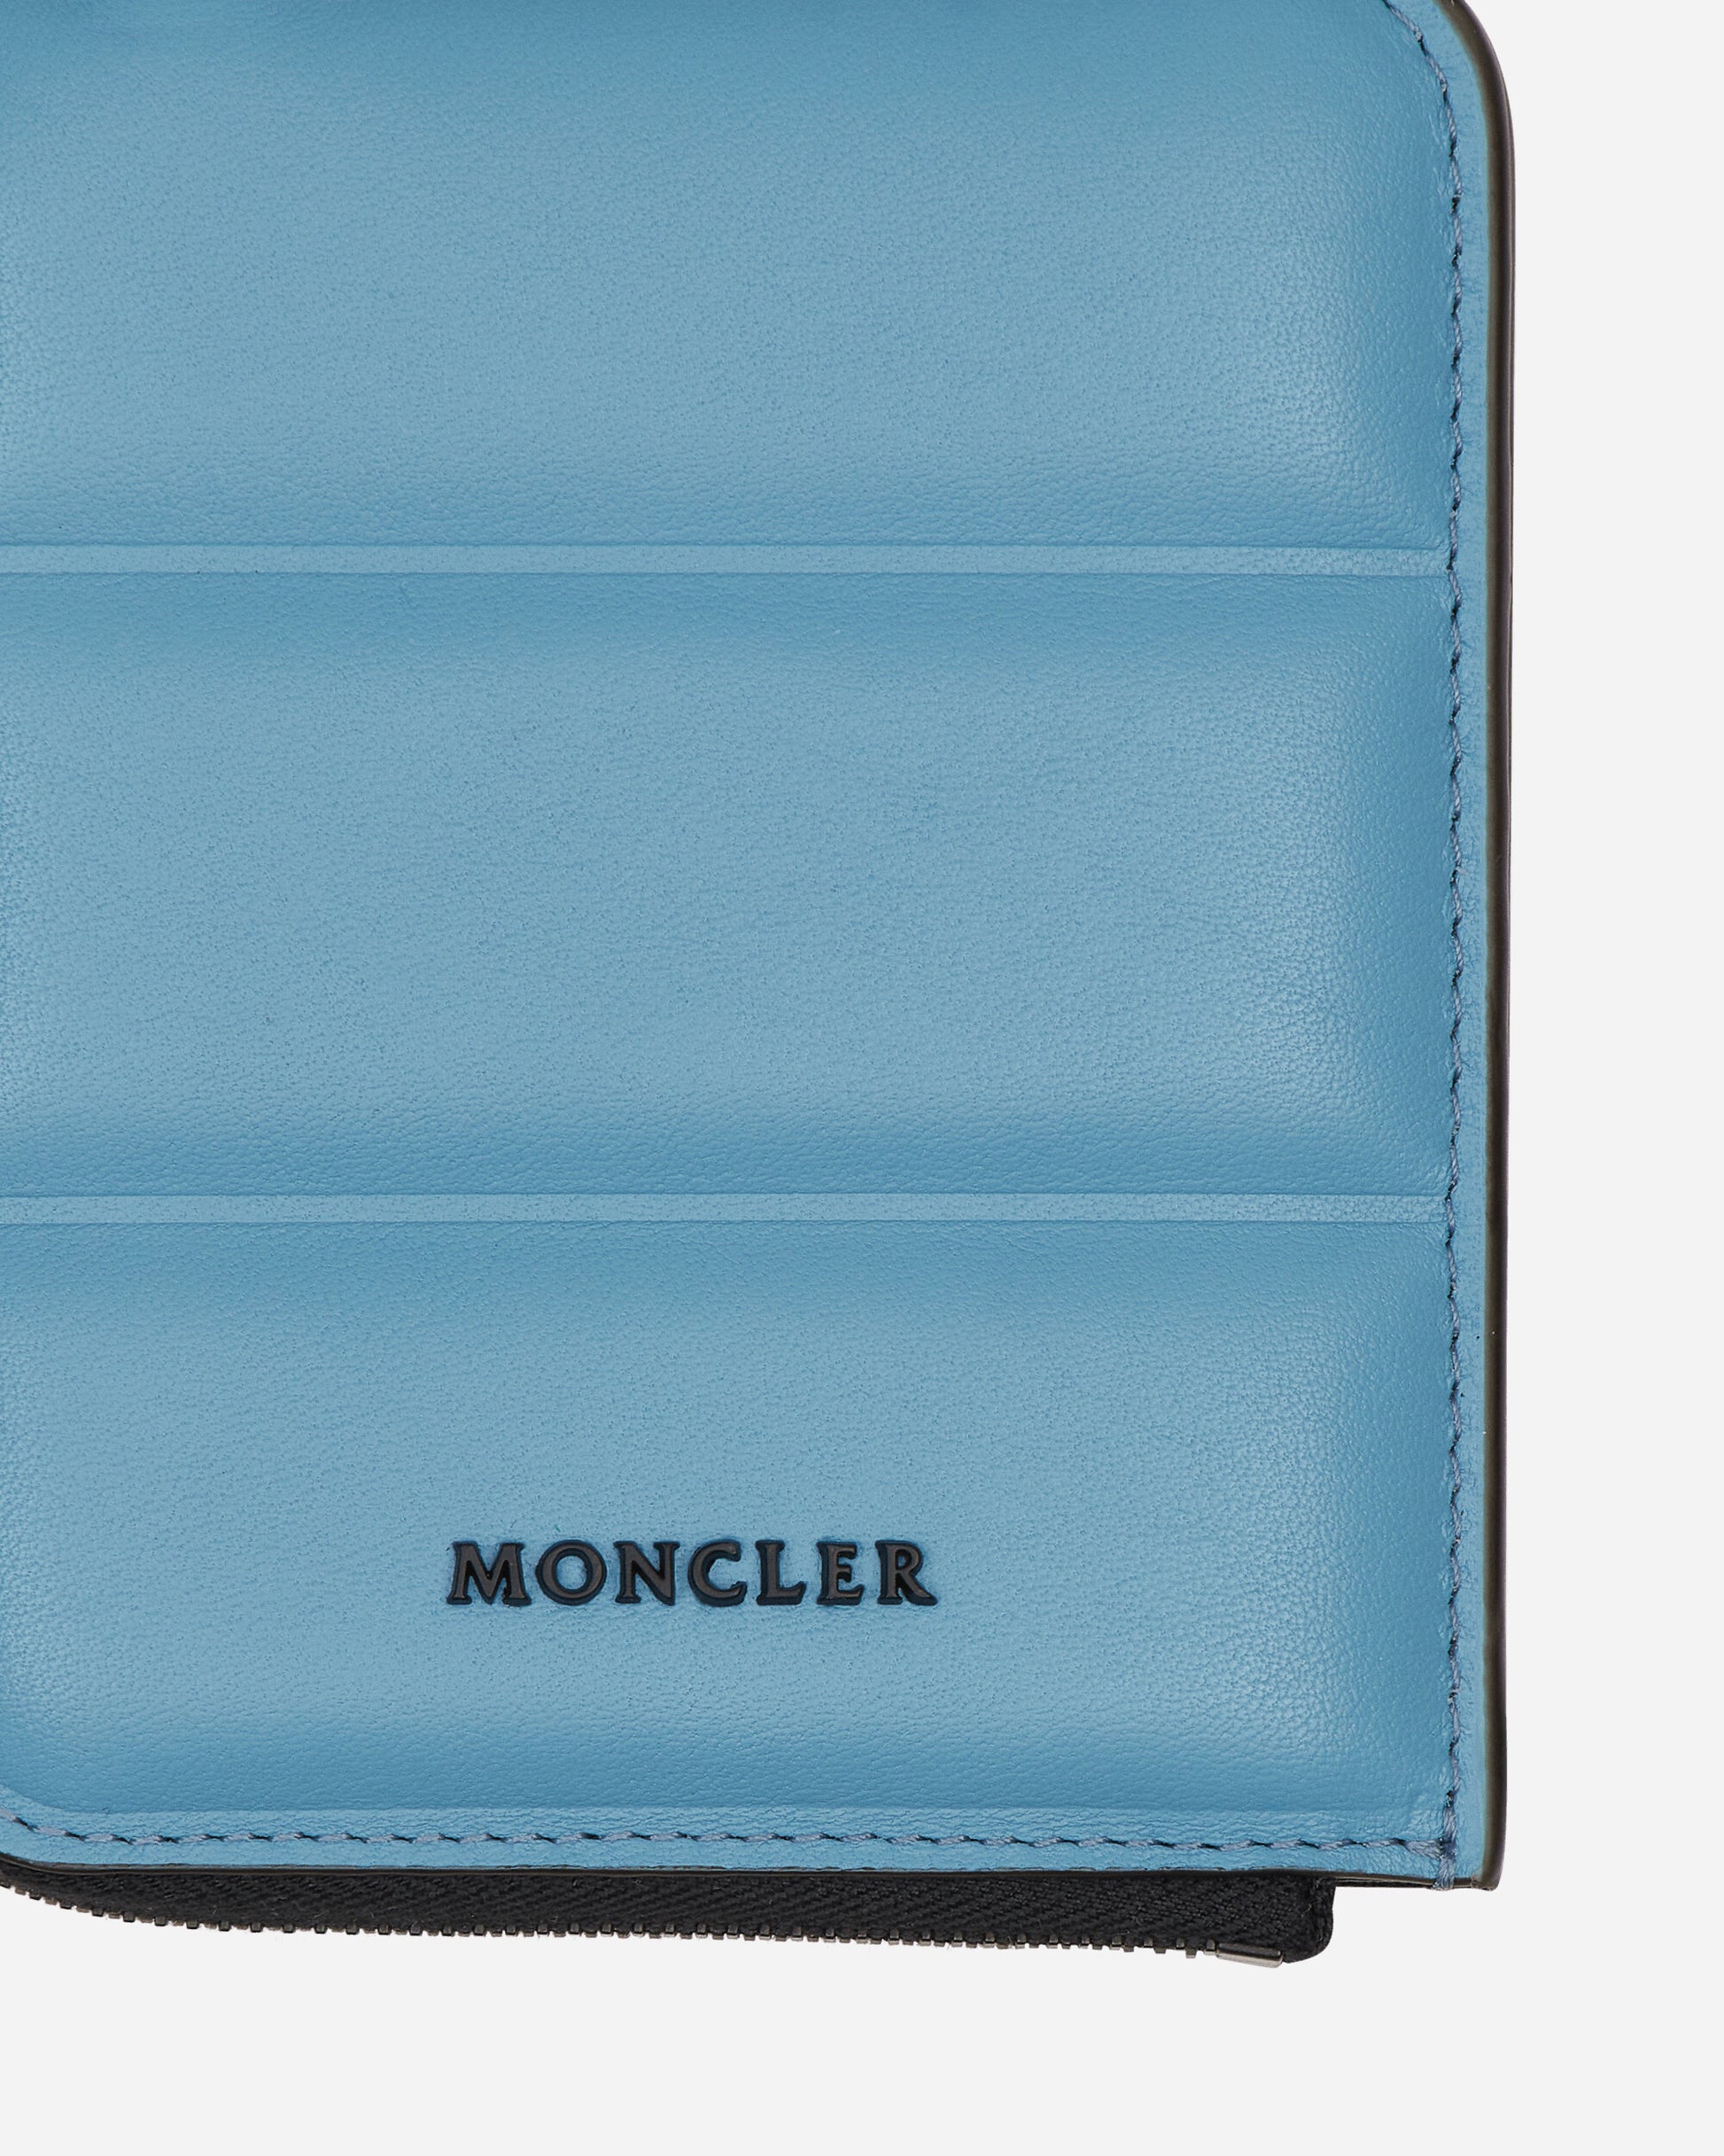 Moncler Flat Small Wallet Light Blue Wallets and Cardholders Wallets 6C00003M2743 722